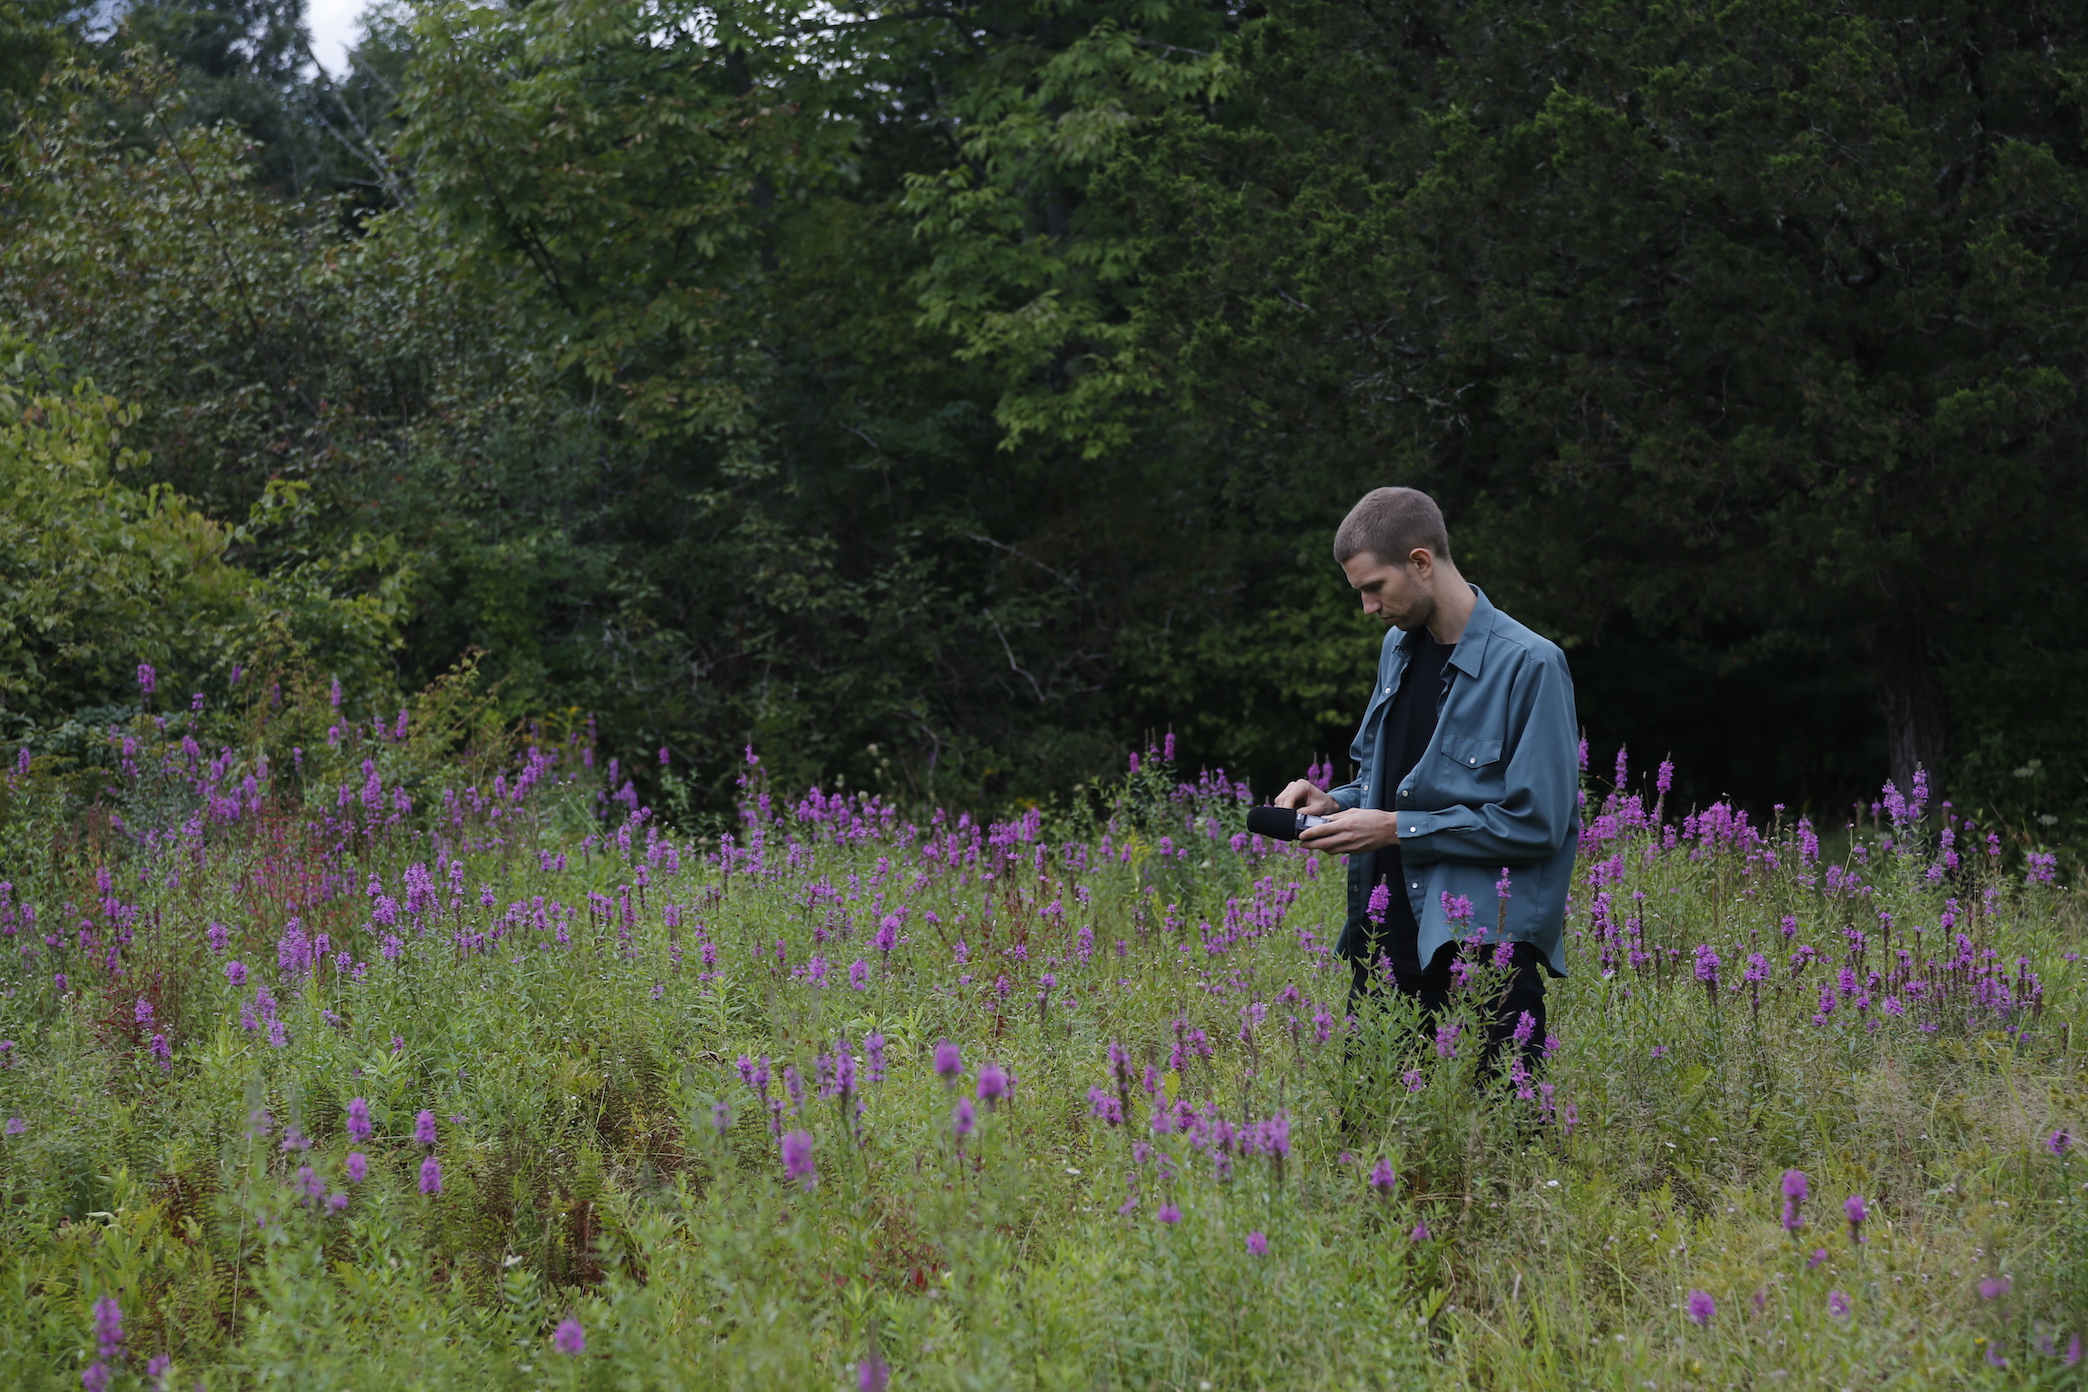 Angus Tarnawsky Setting Up Live Stream Surveillance Cameras in the Woods and Fields of Wave Farm's Property: Image 2